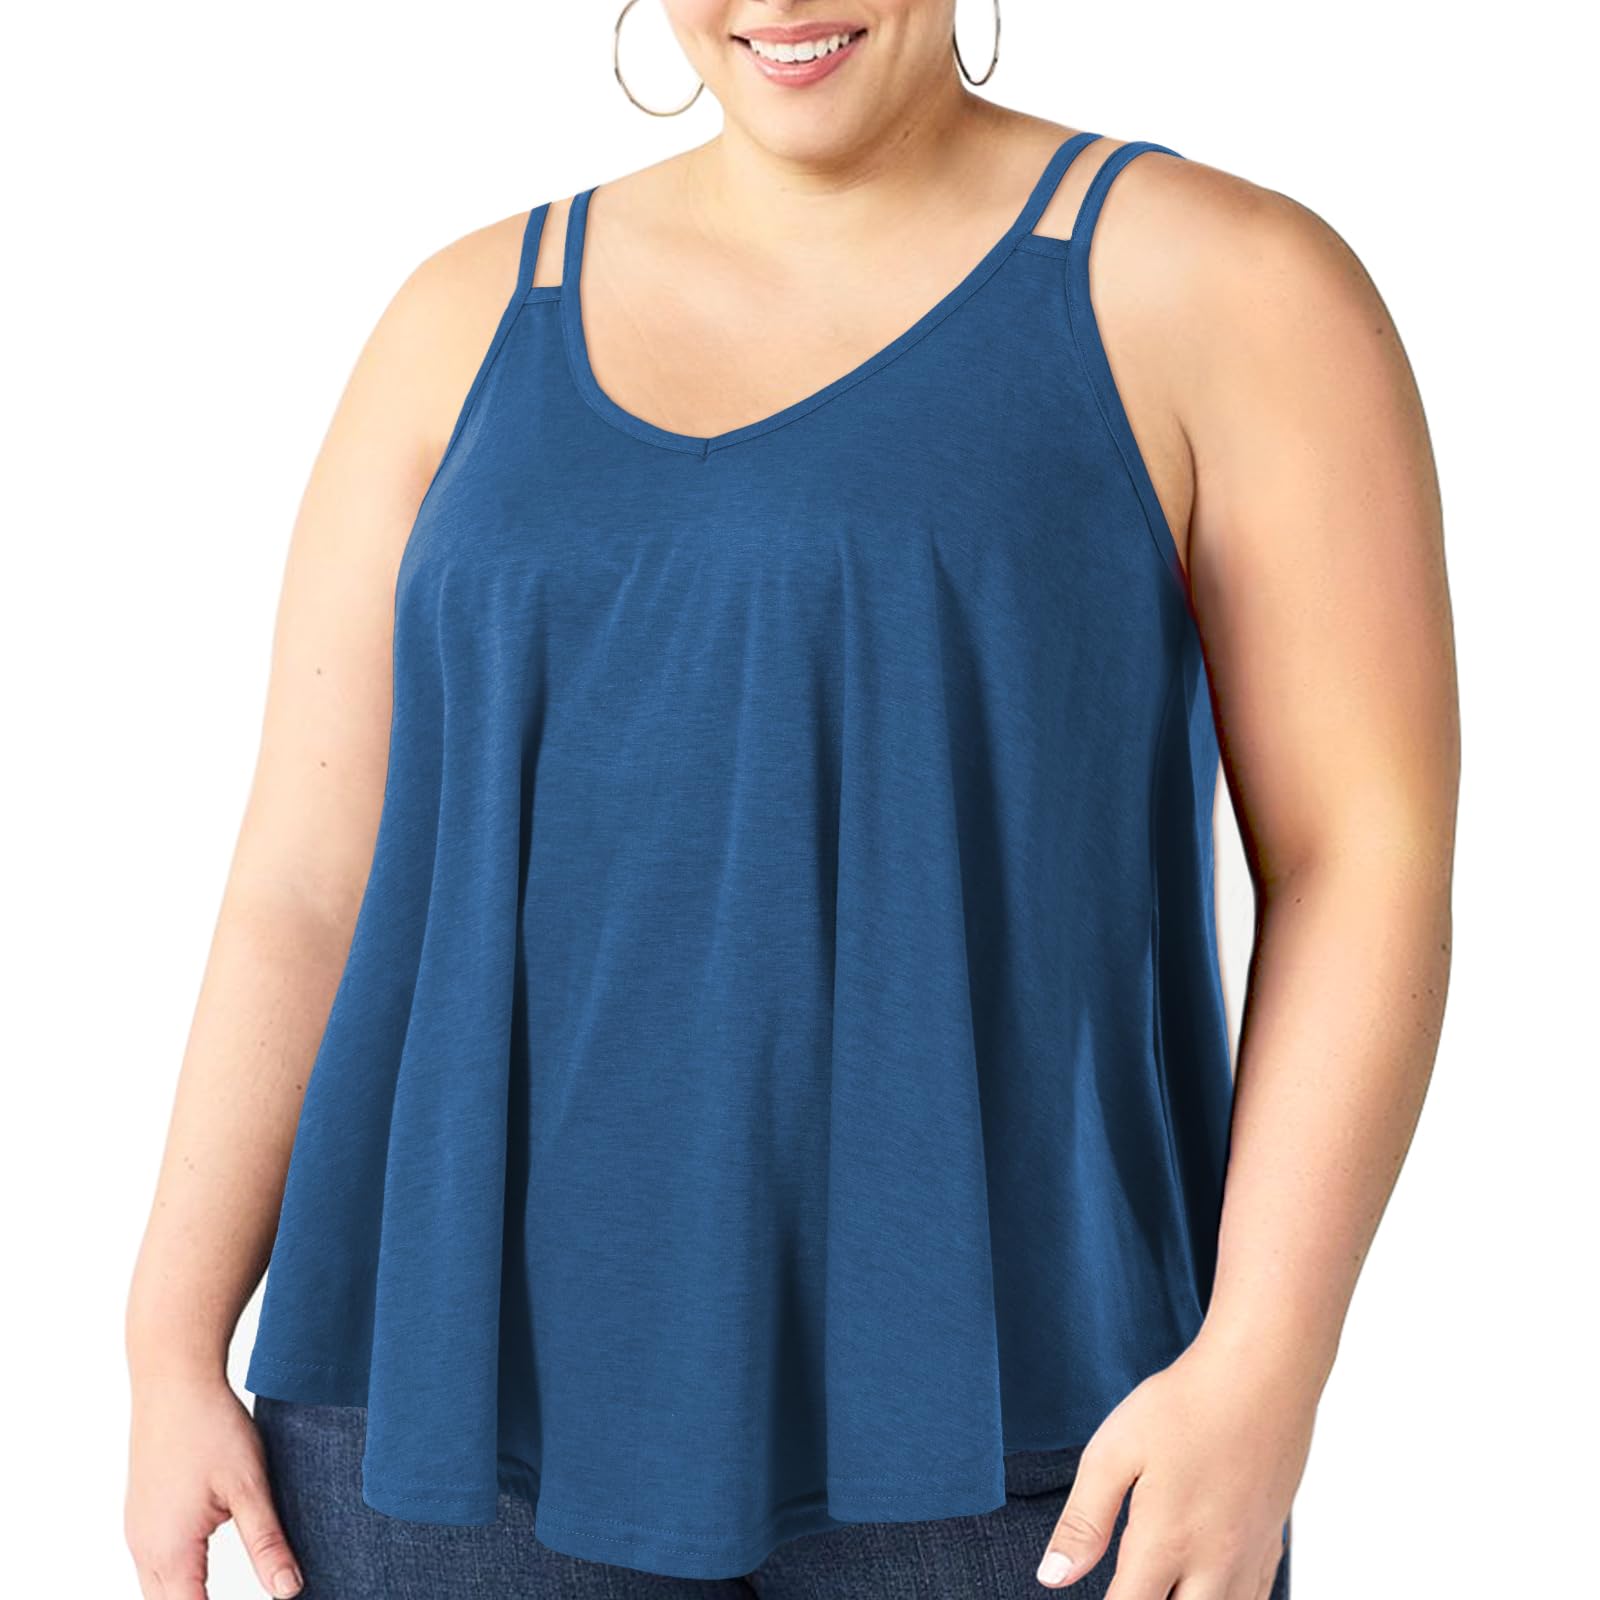 Plus Size Tank Tops for Women V Neck Spaghetti Camisole-Azure Blue - Moon Wood